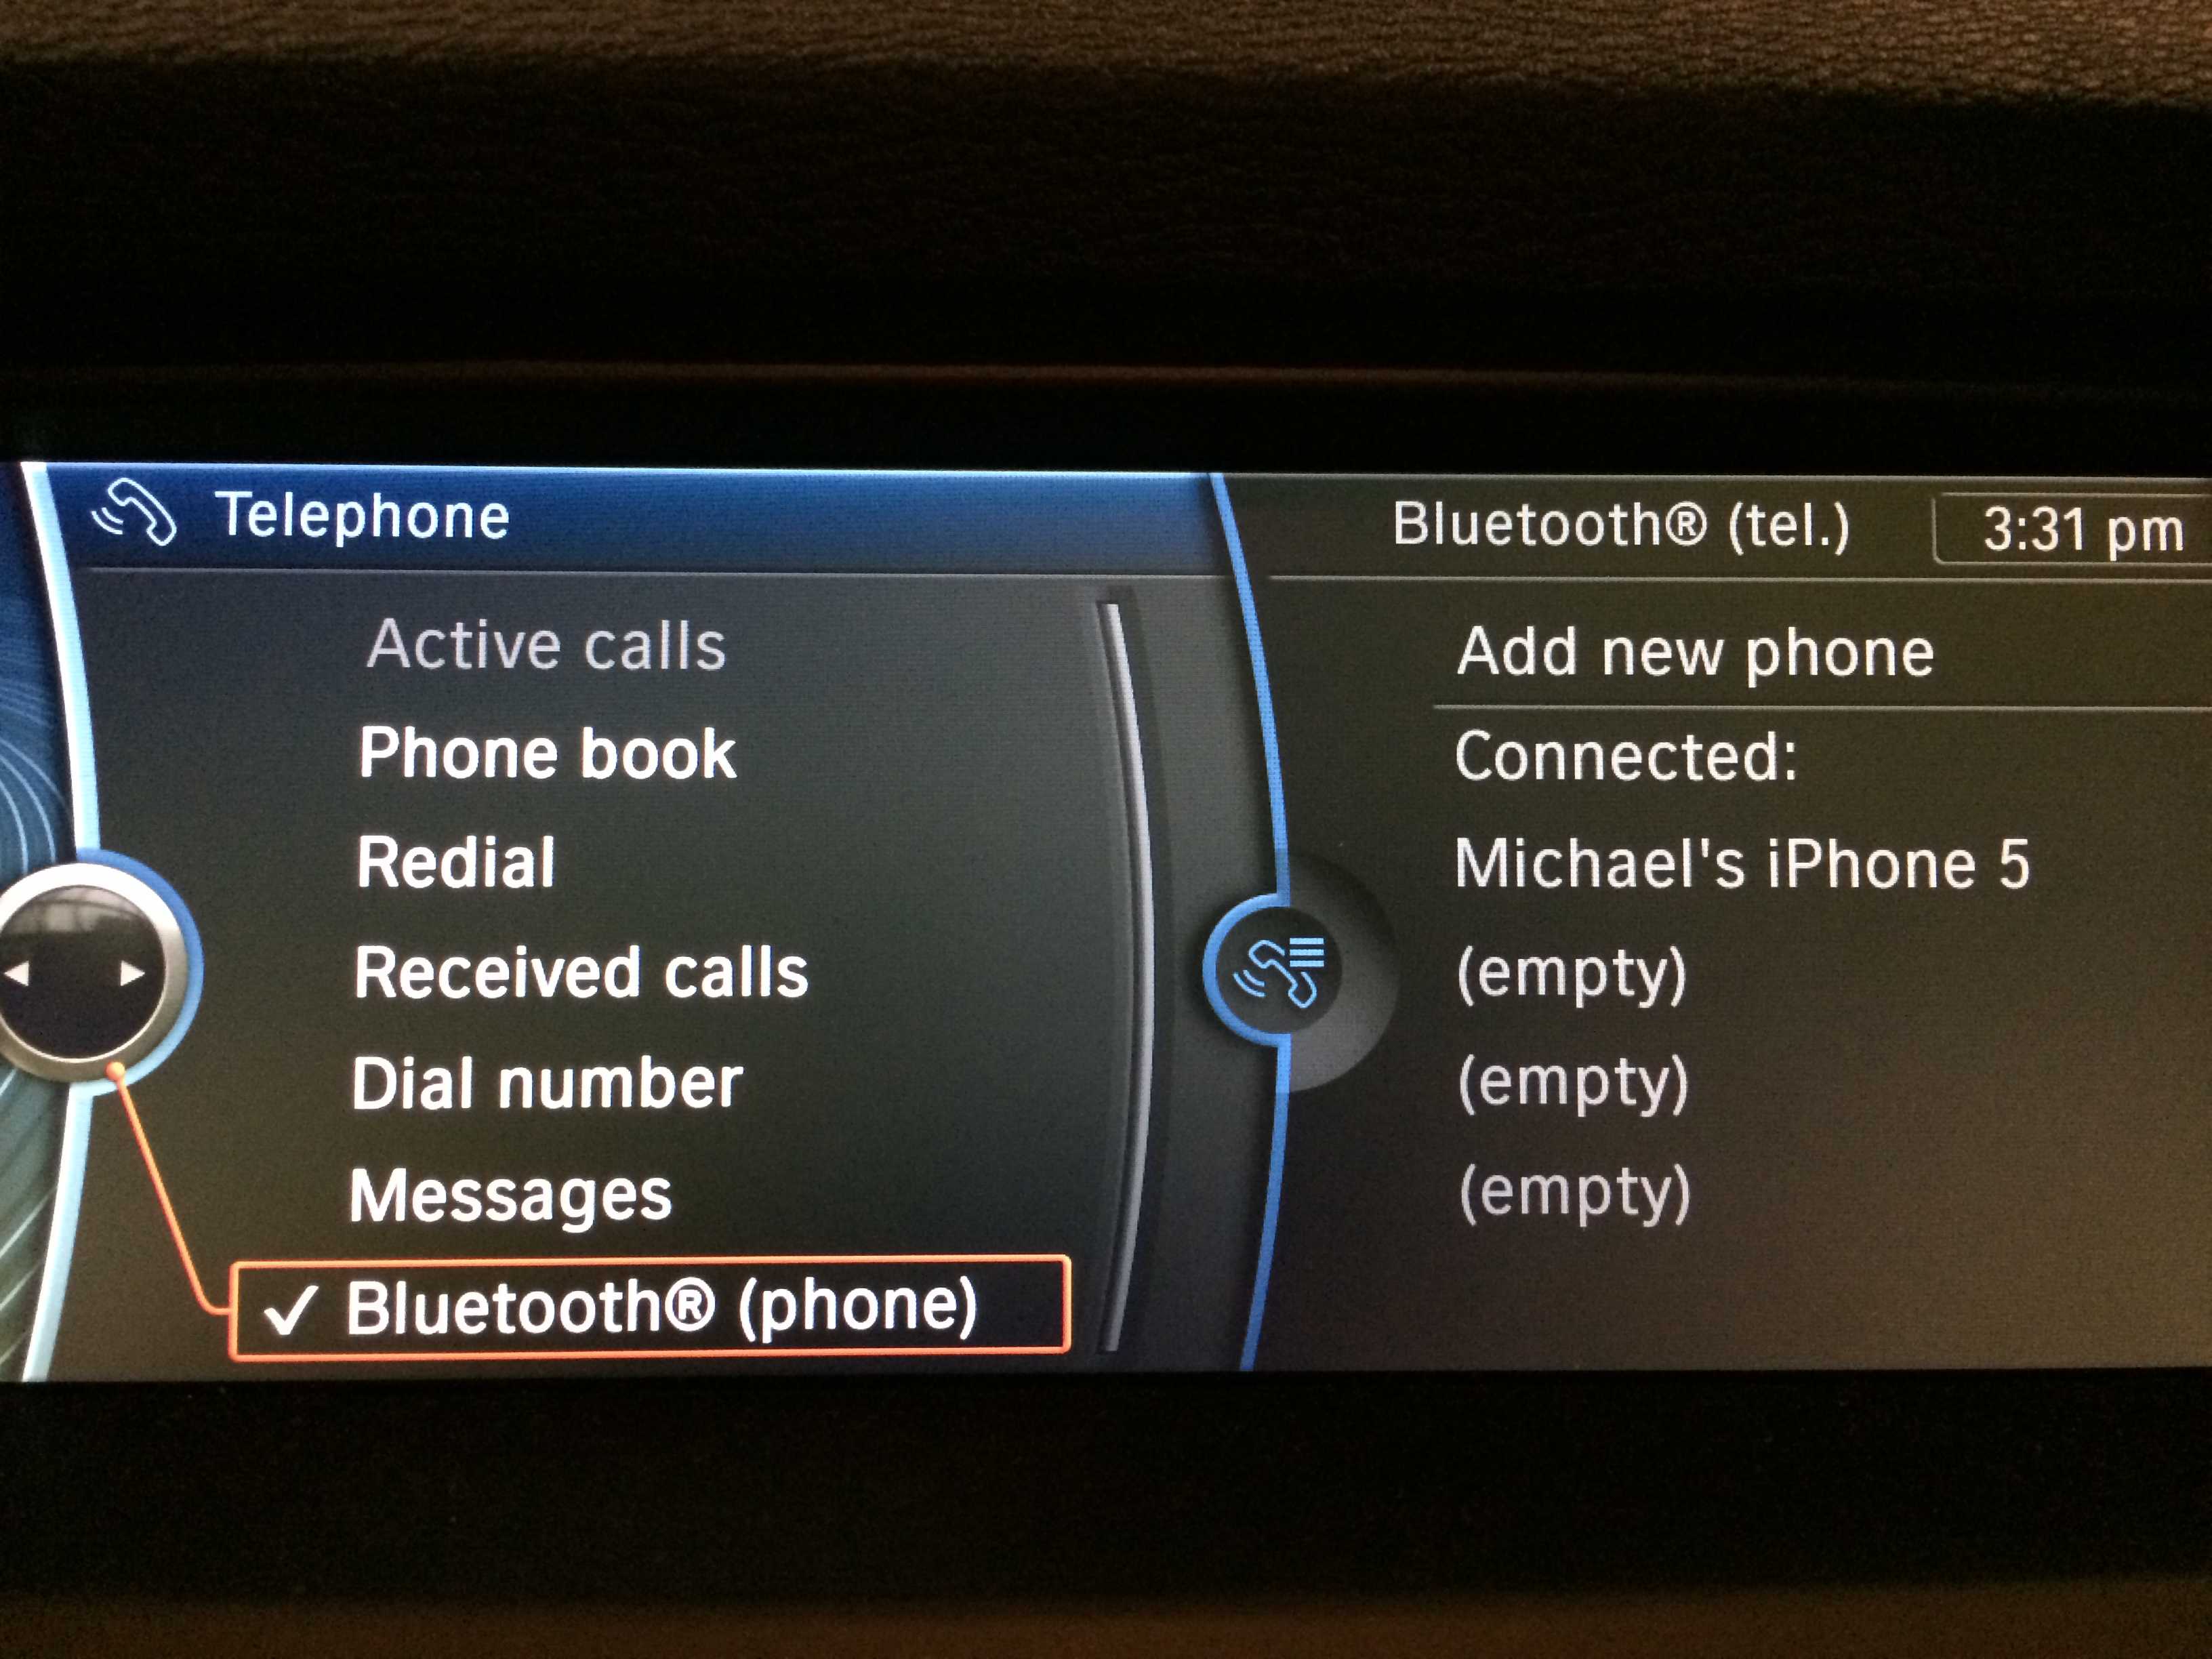 Connect my phone bmw bluetooth #3